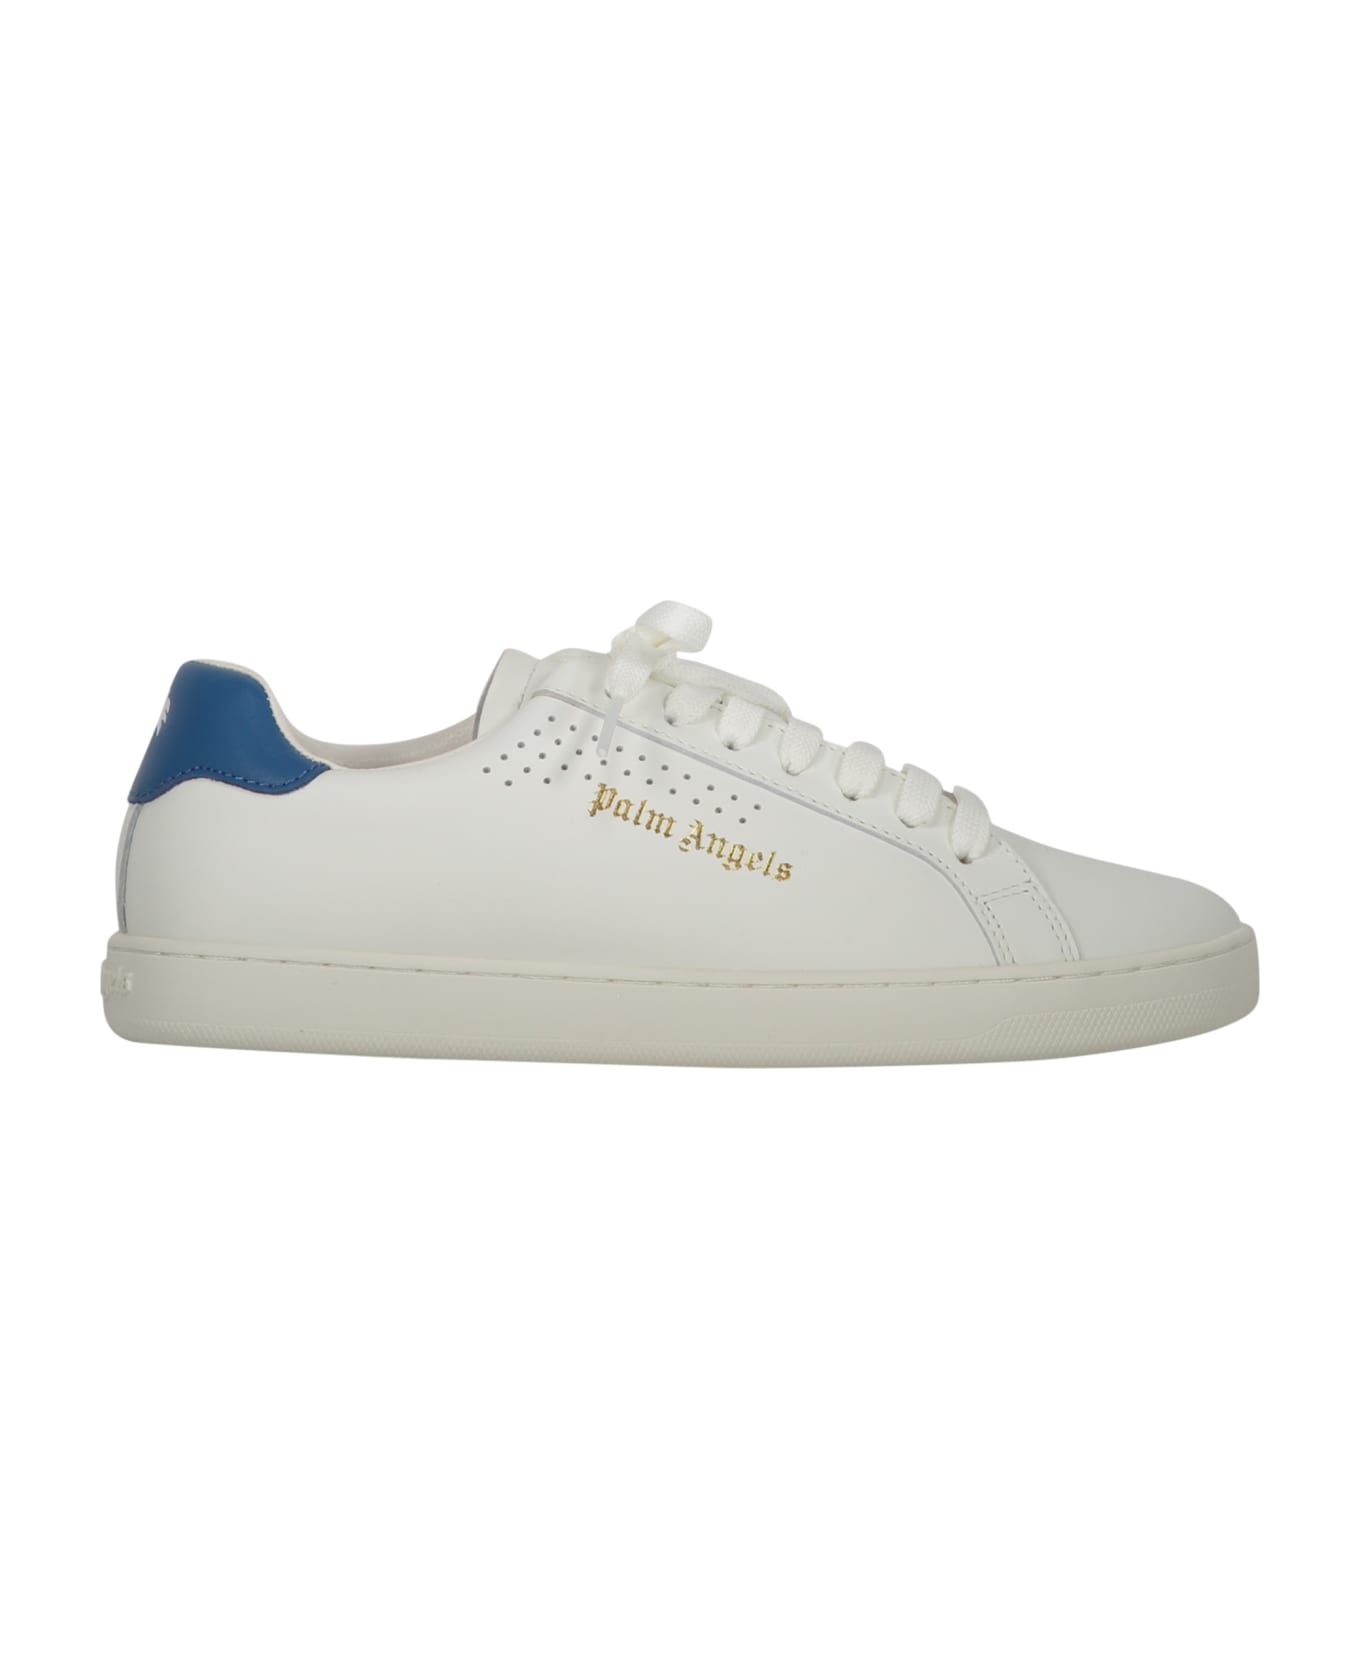 Palm Angels New Tennis Leather Sneakers - White スニーカー